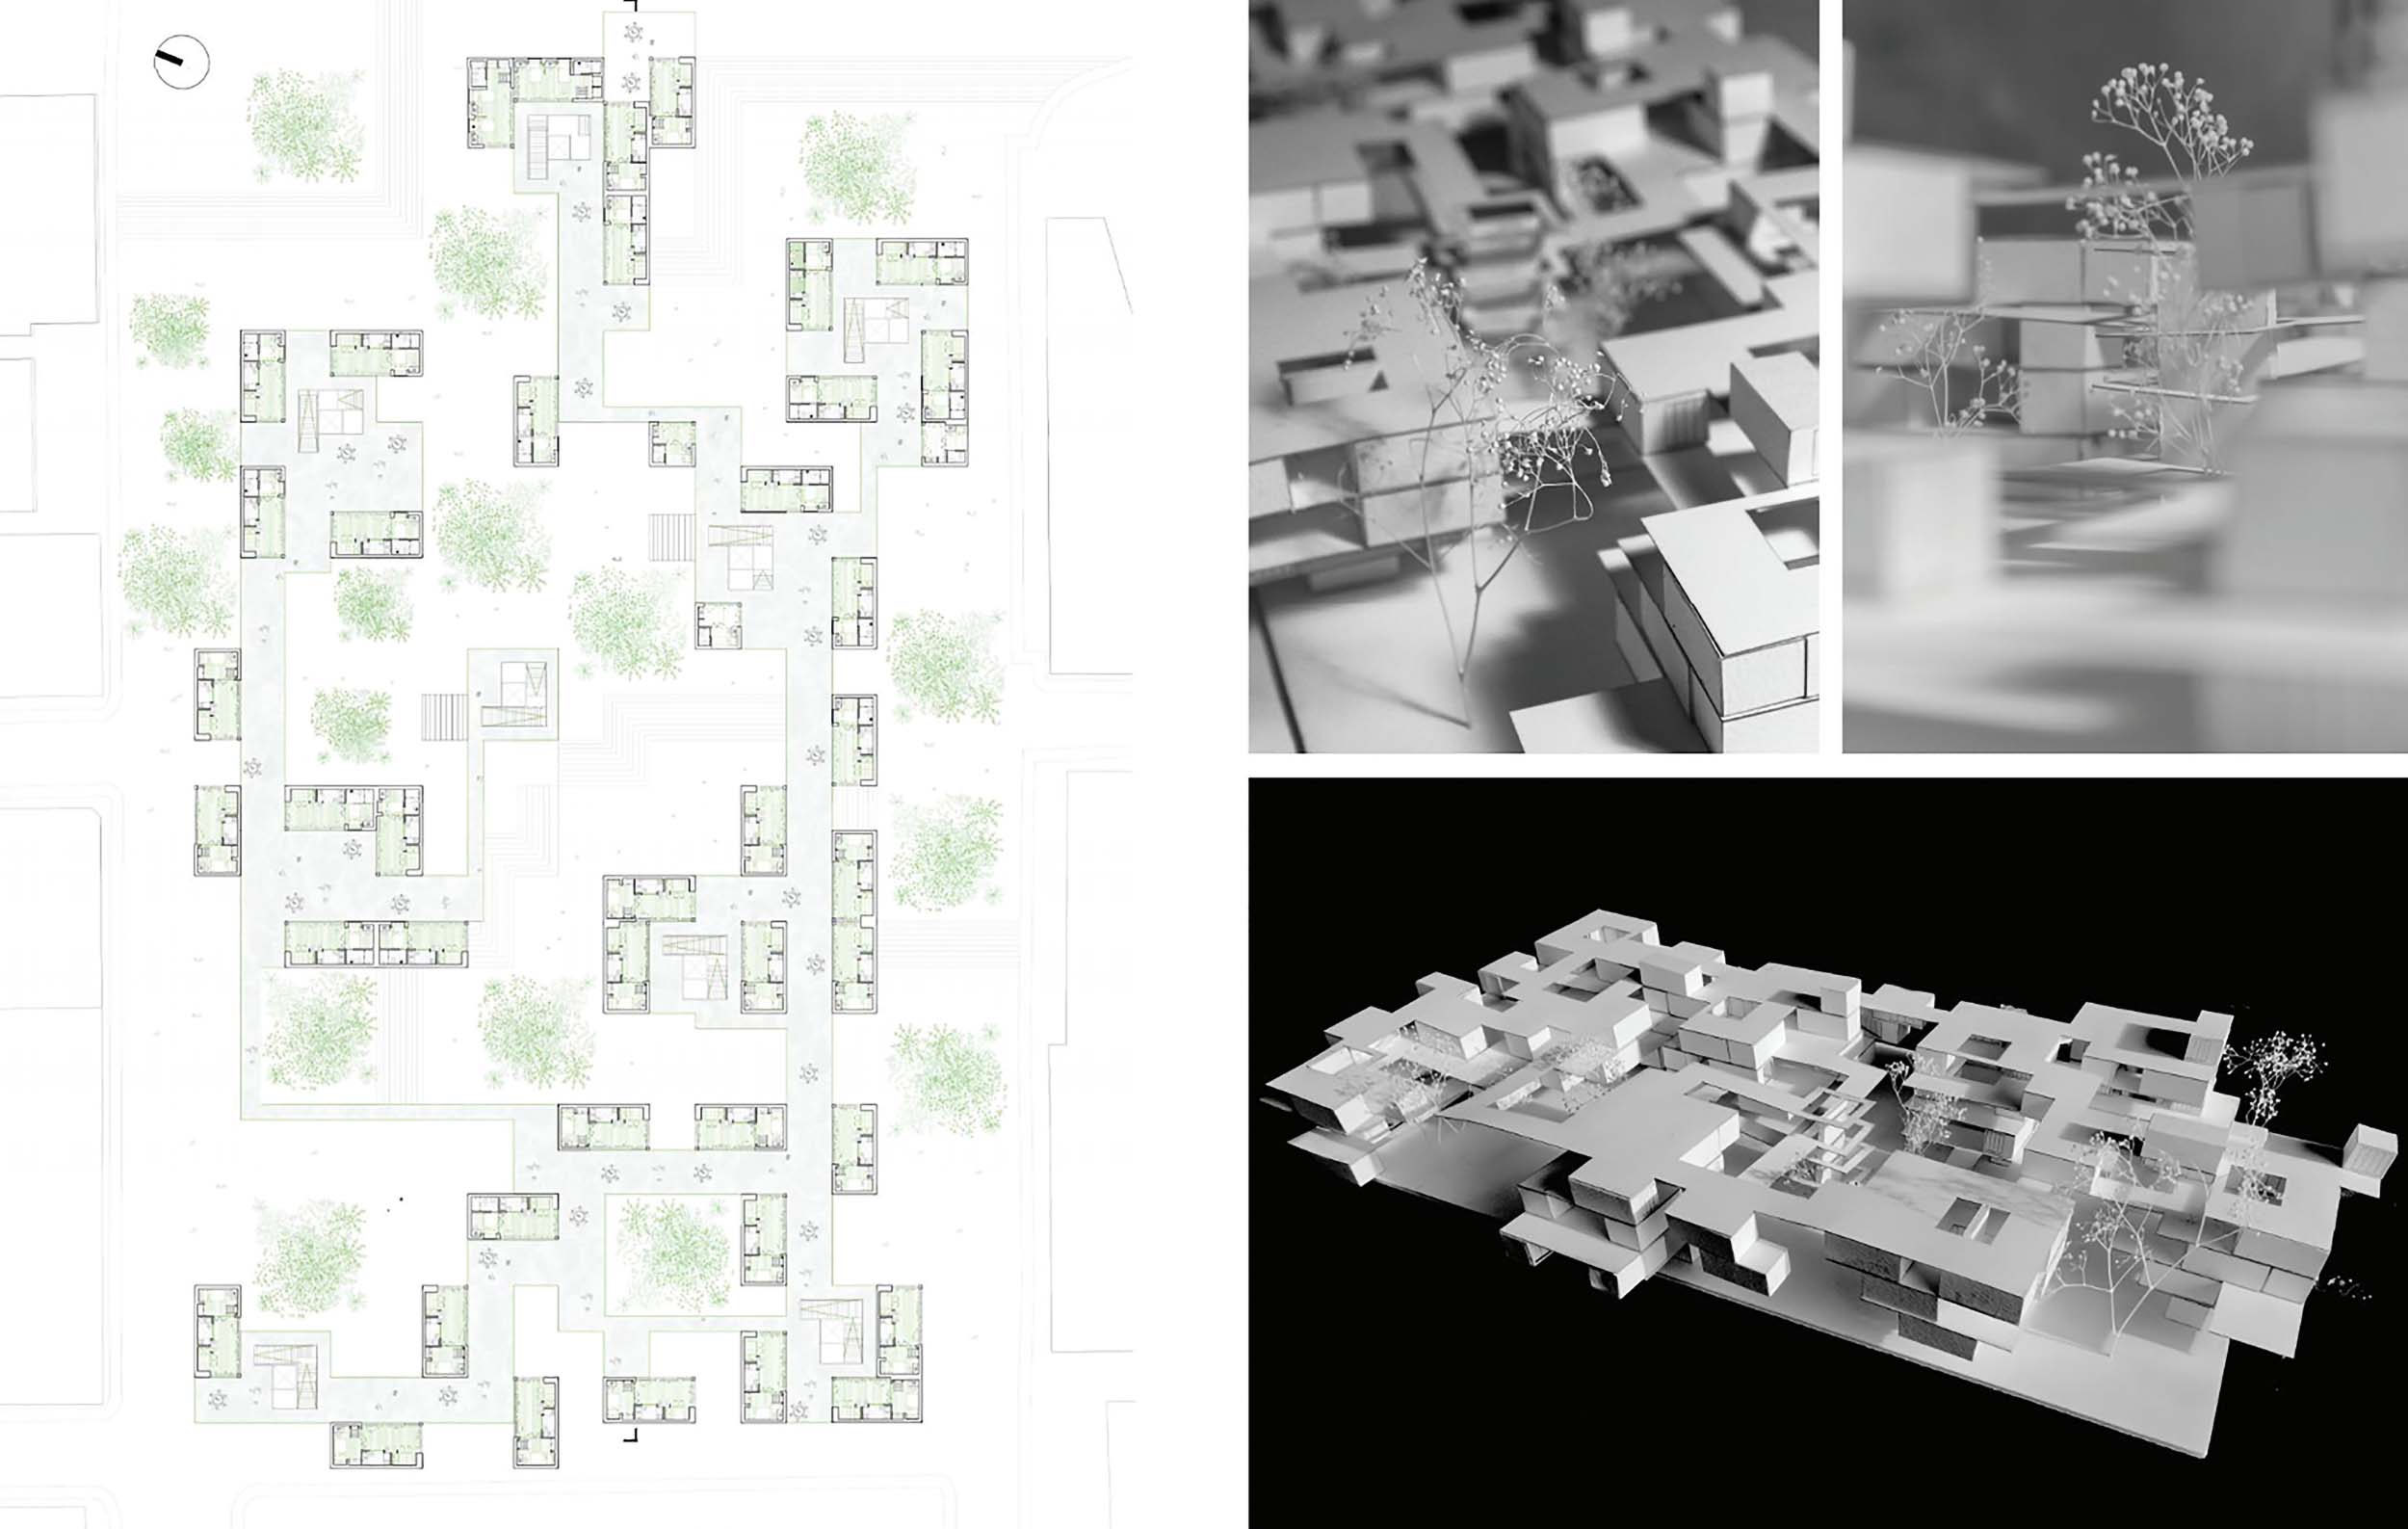 Left: diagram of building layout on a map, right: 3d mini models of the buildings from the map